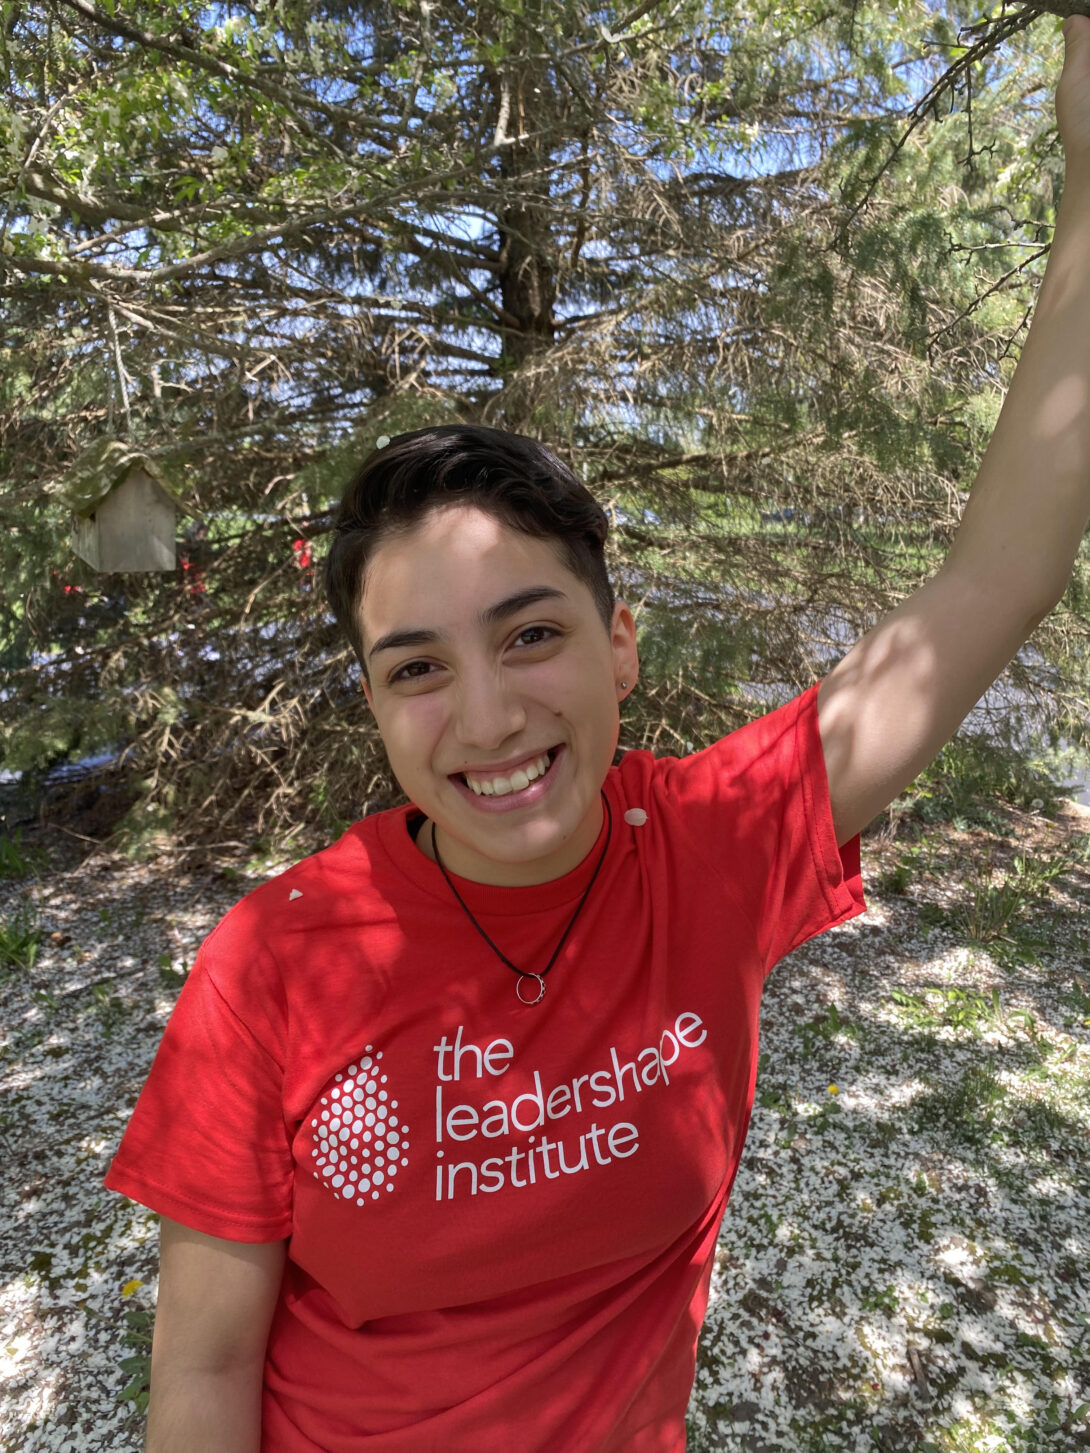 Febe is a Latinx person in a red short sleeve shirt smiling at the camera with one arm raised. Behind them, there is a large pine tree.